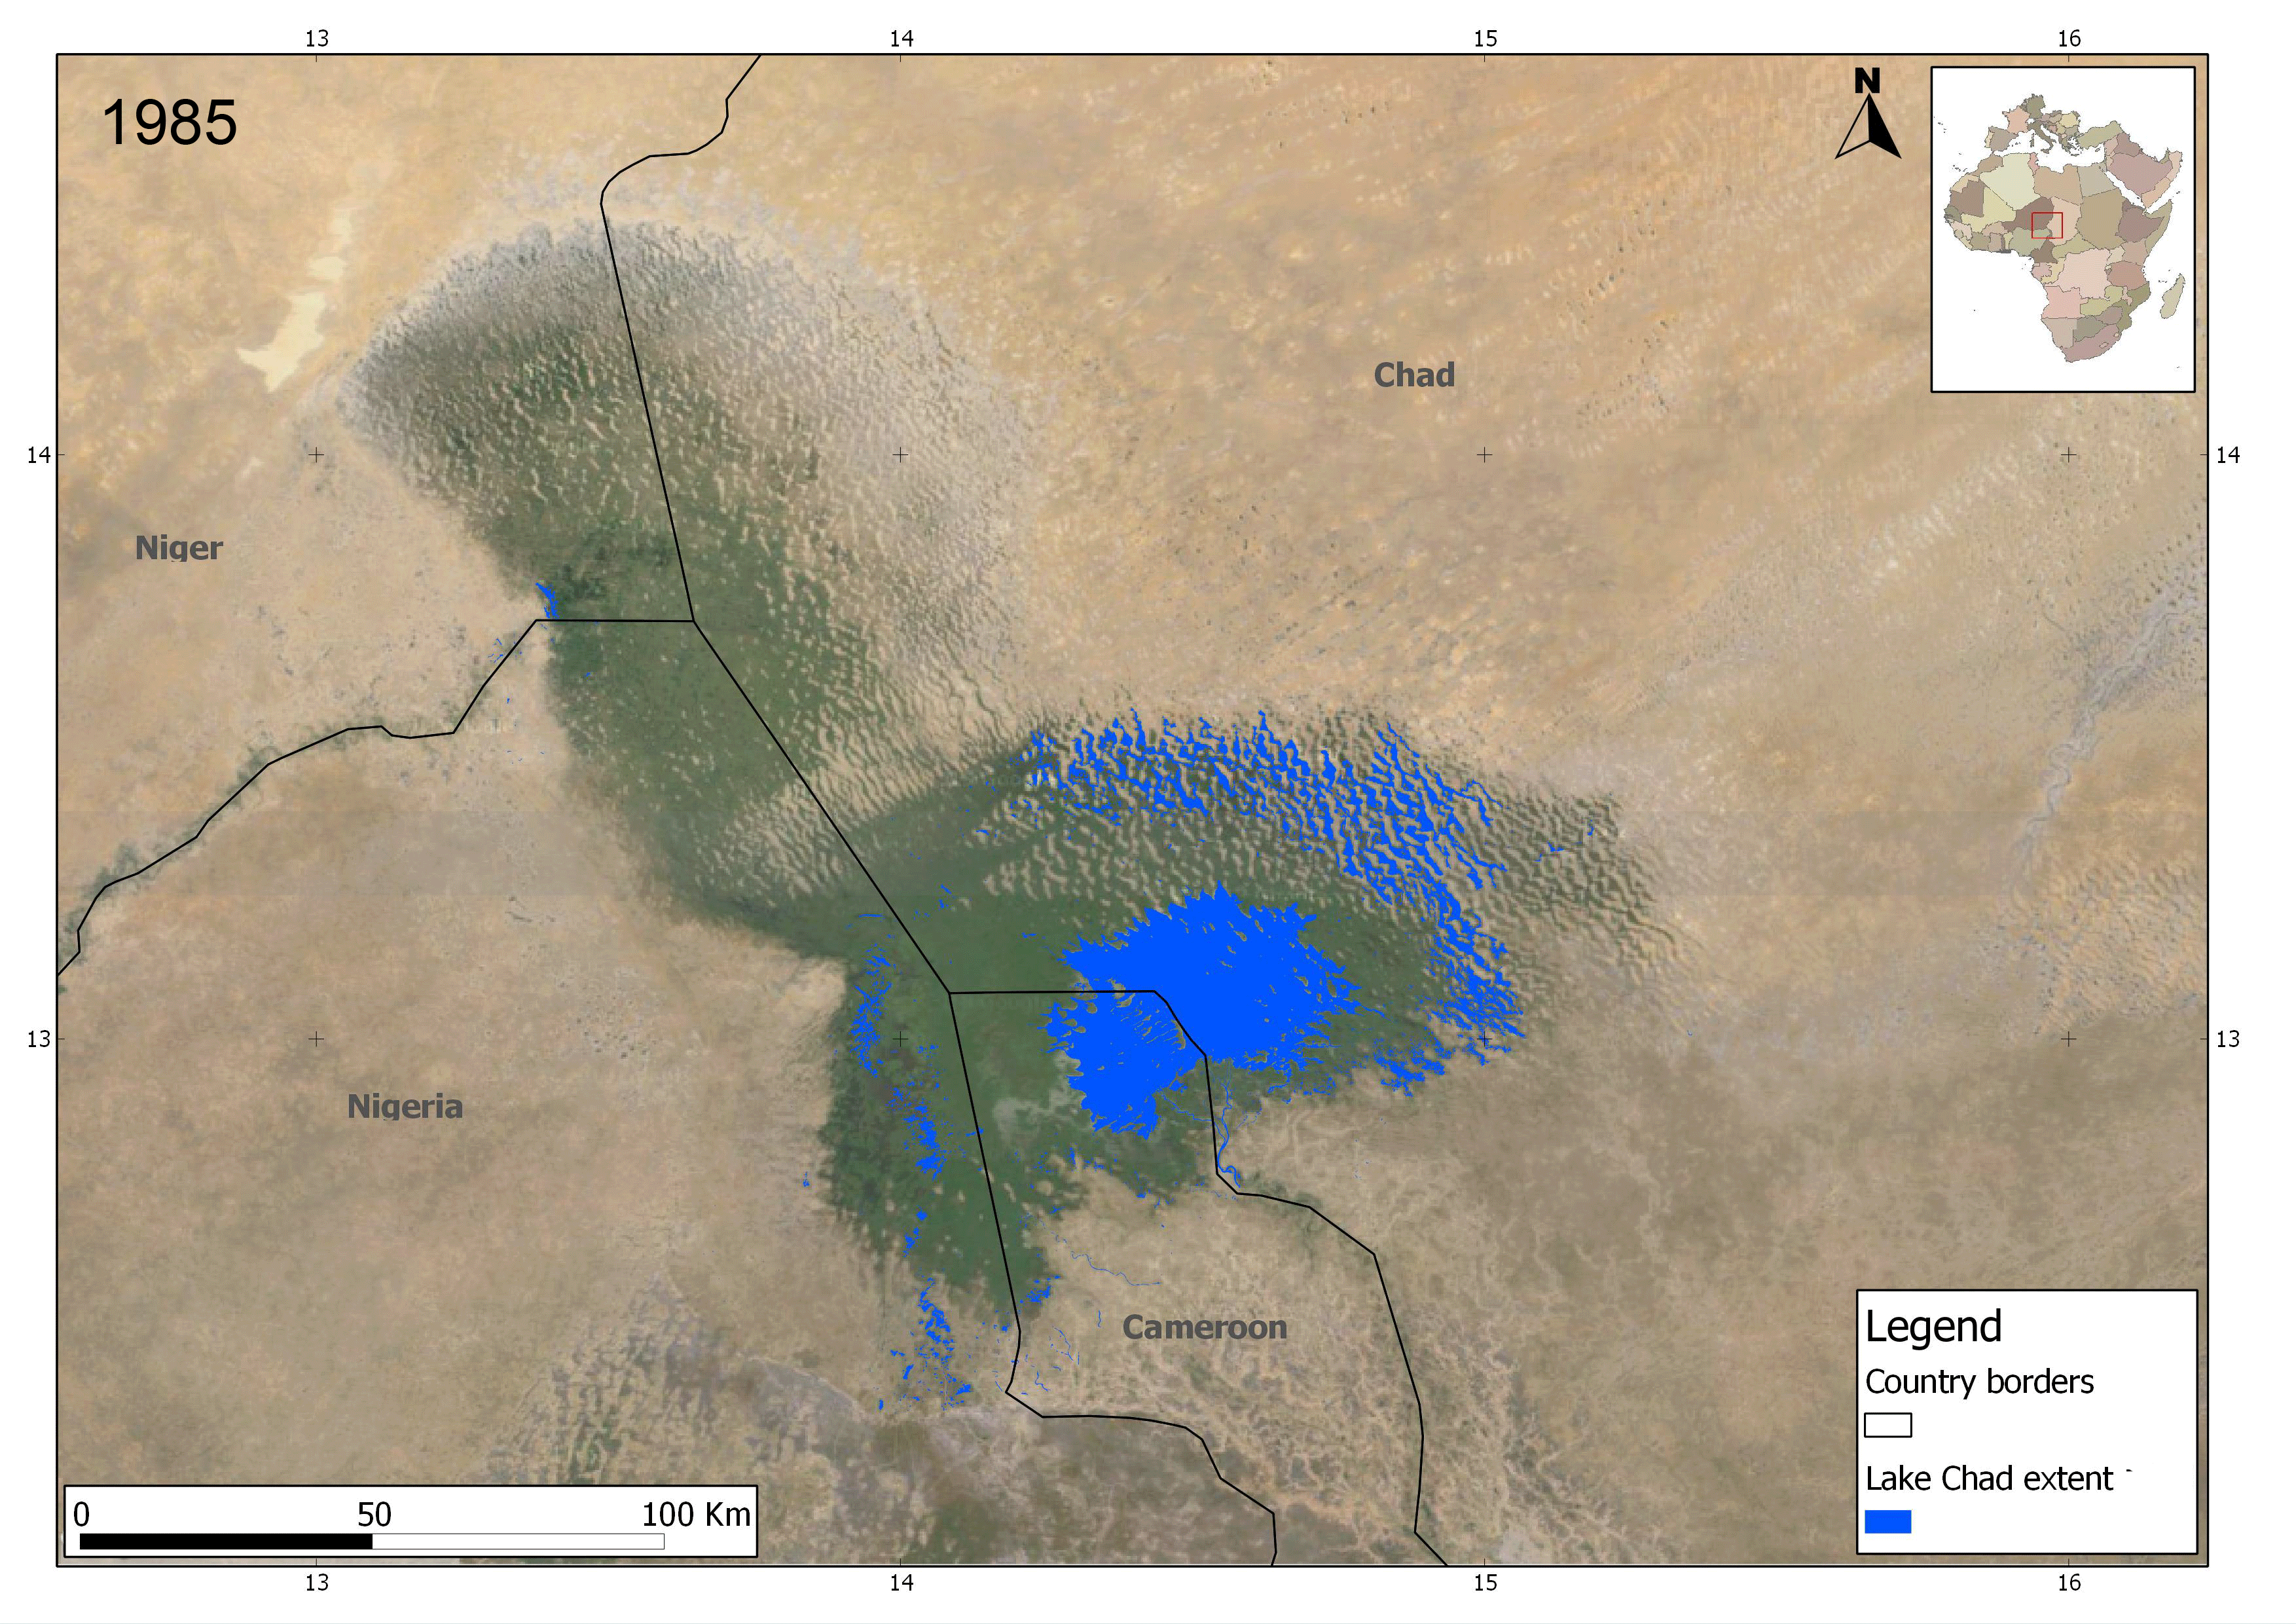 Lake Chad water extent increase